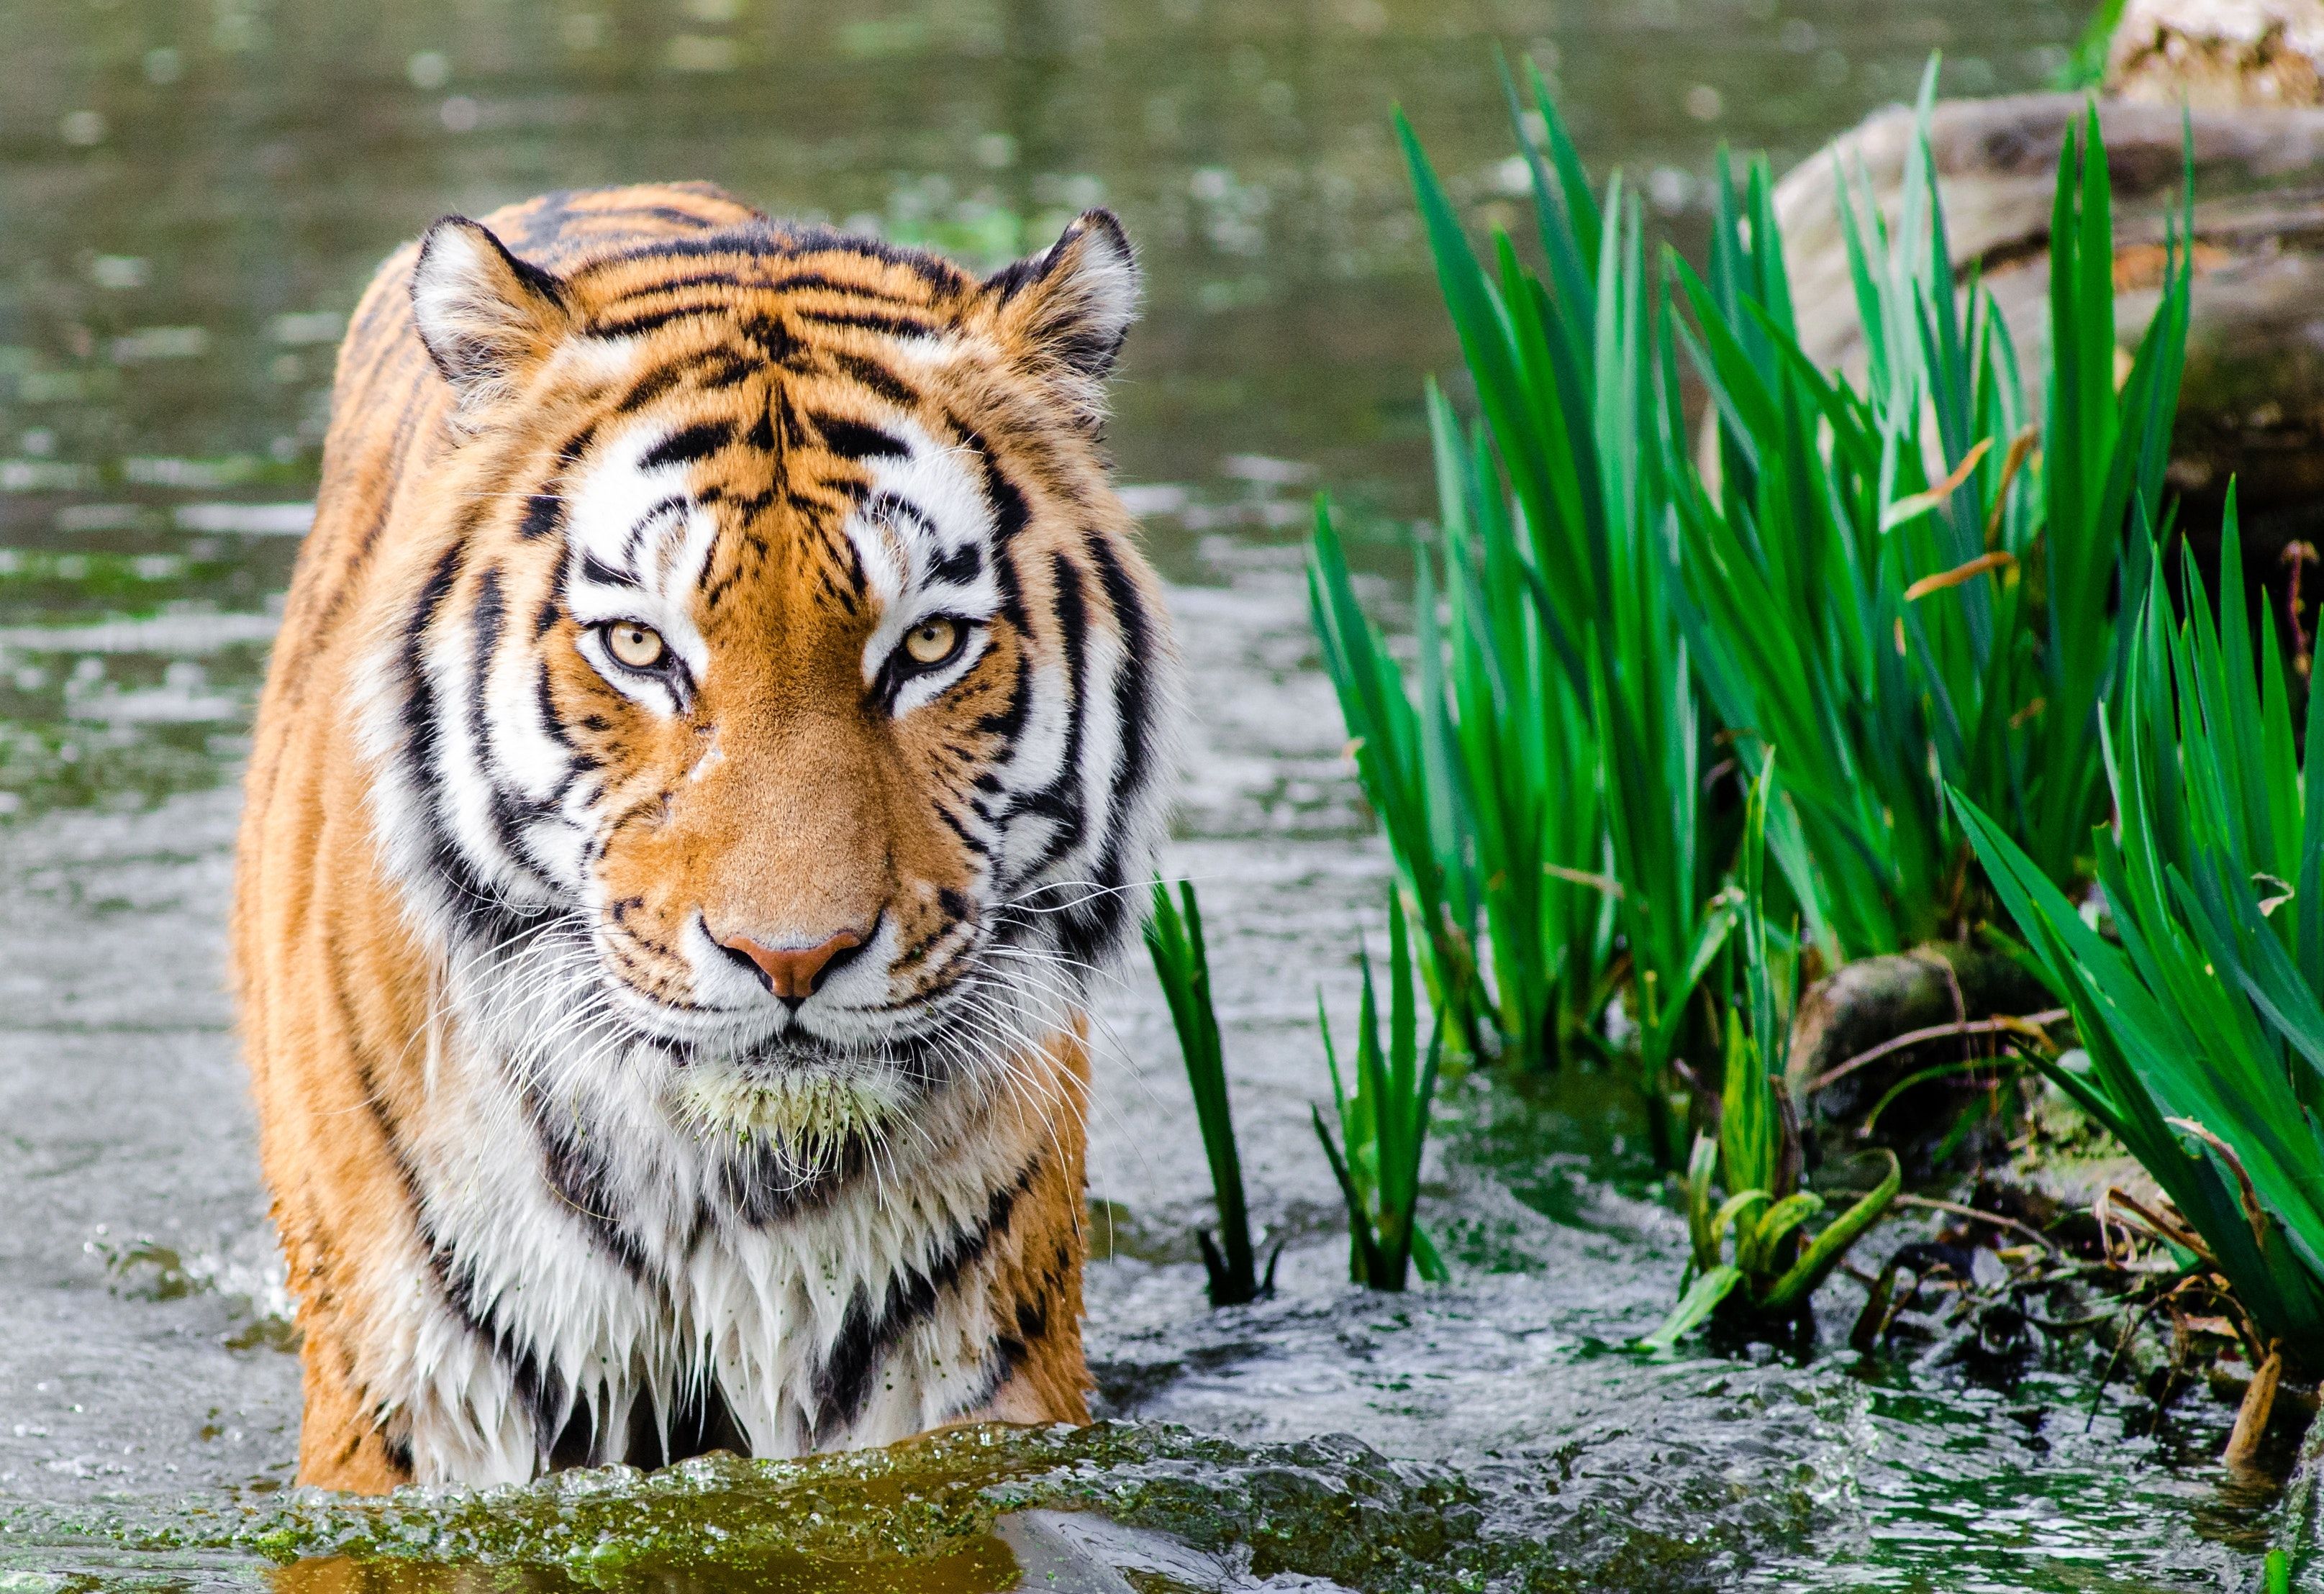 Tiger 4K wallpaper for your desktop or mobile screen free and easy to download